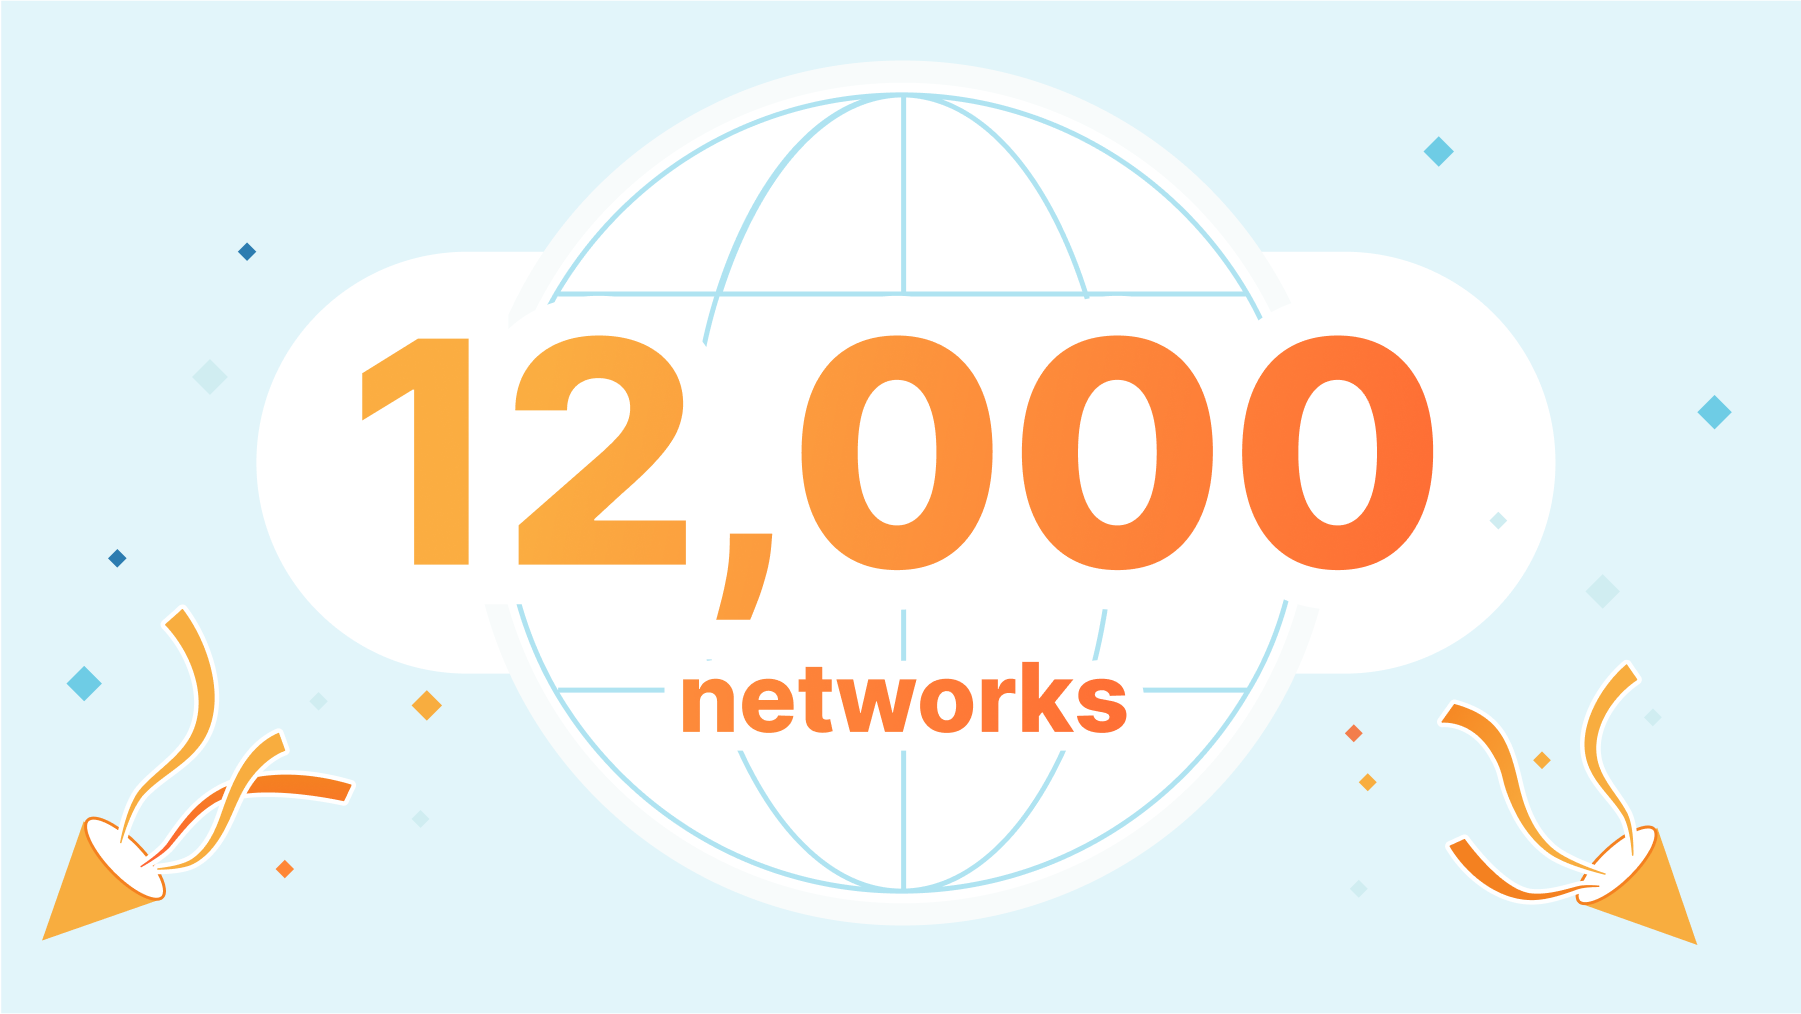 Cloudflare's global network grows to 300 cities and ever closer to end users with connections to 12,000 networks